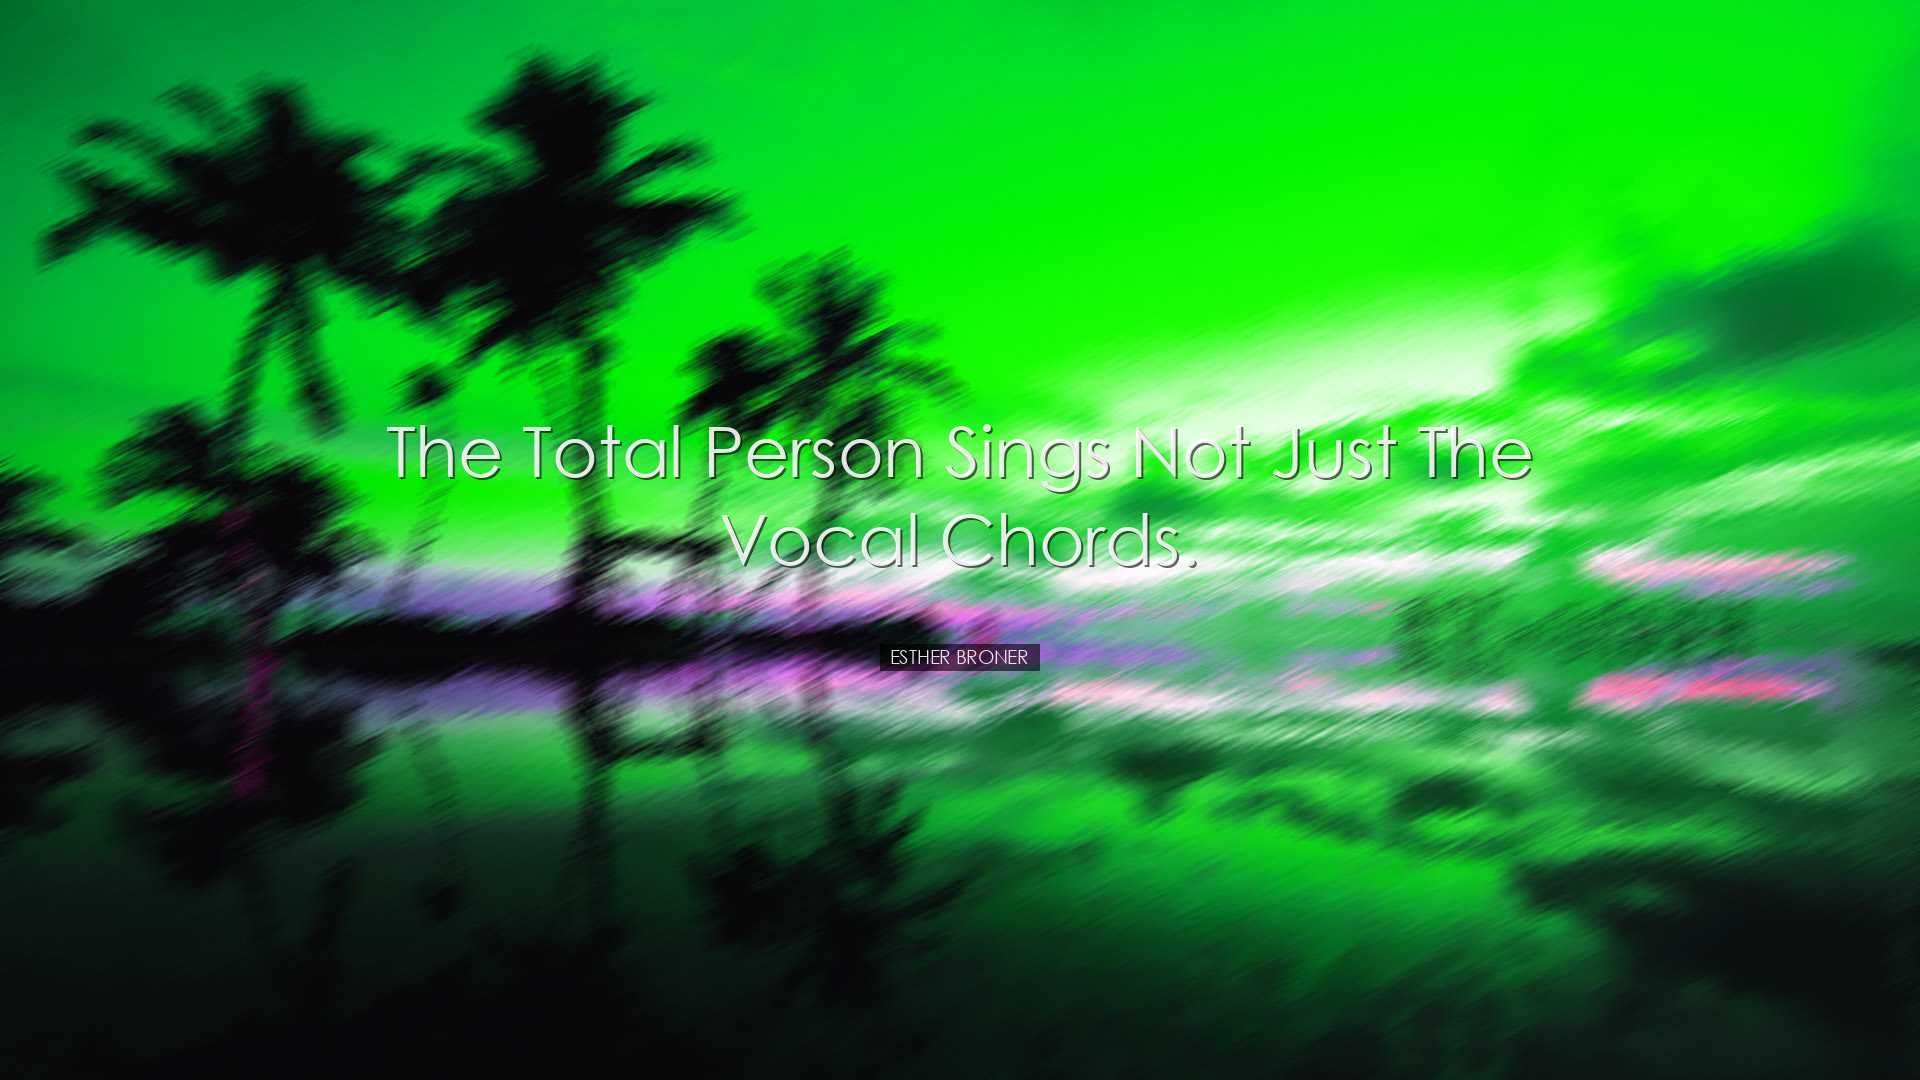 The total person sings not just the vocal chords. - Esther Broner